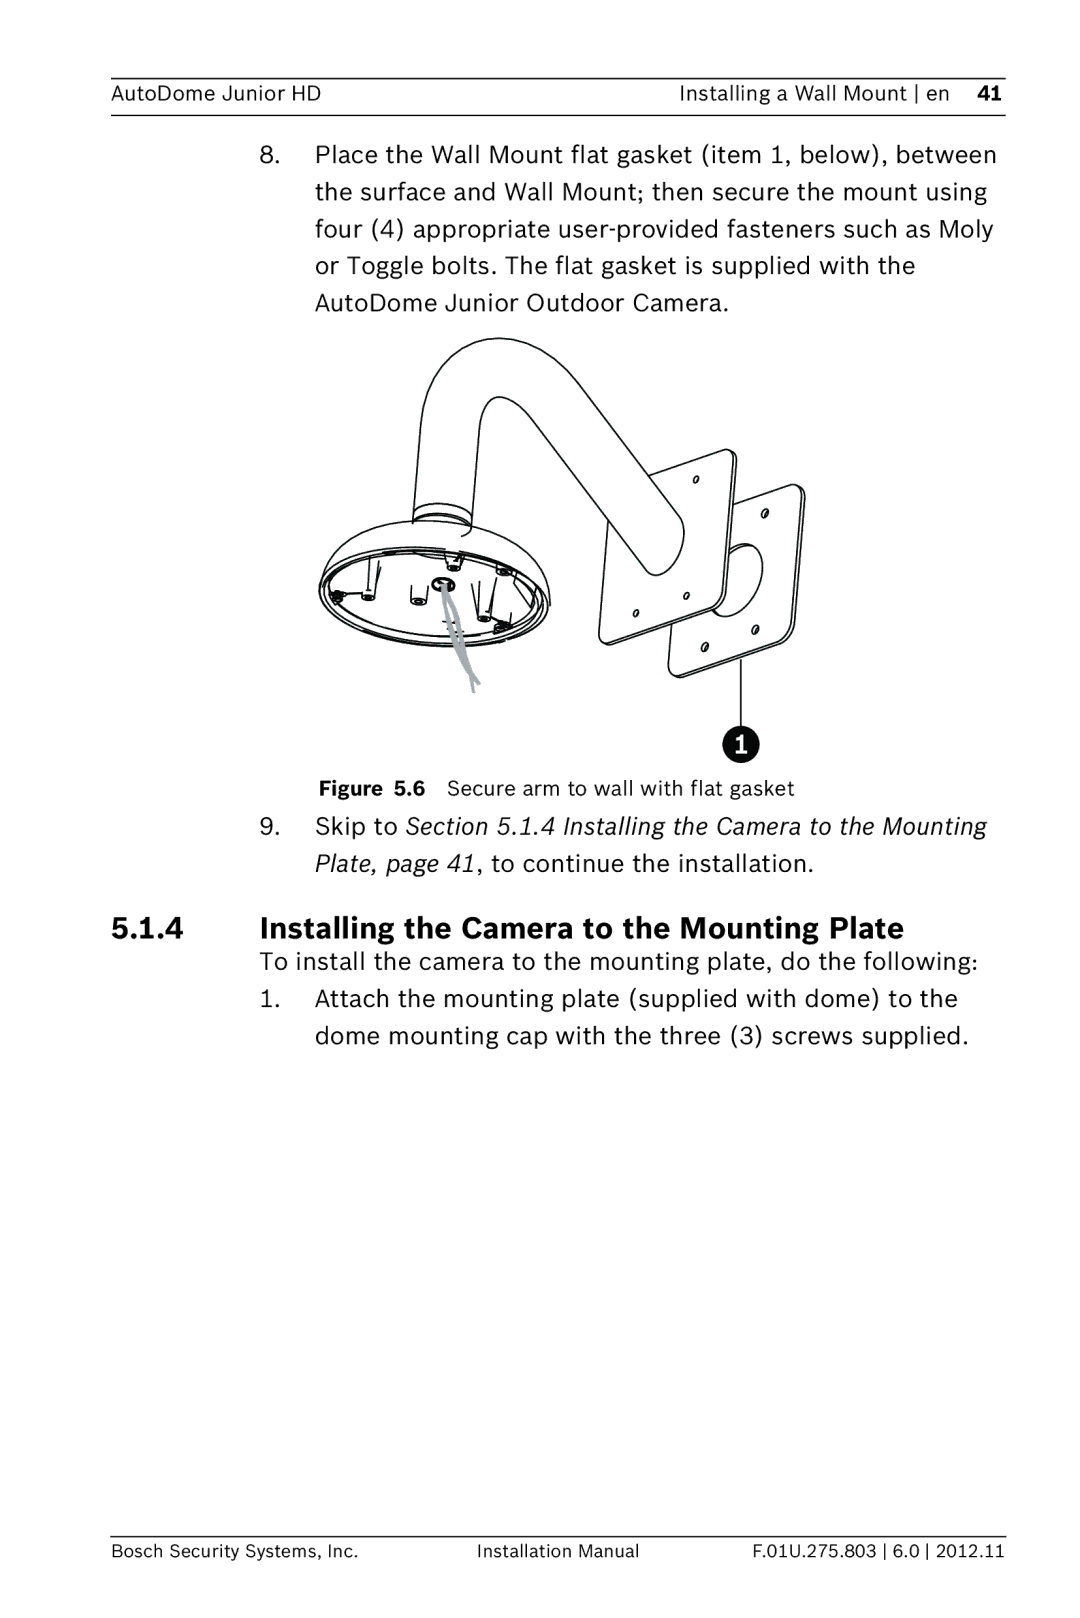 Bosch Appliances VJR SERIES installation manual Secure arm to wall with flat gasket 